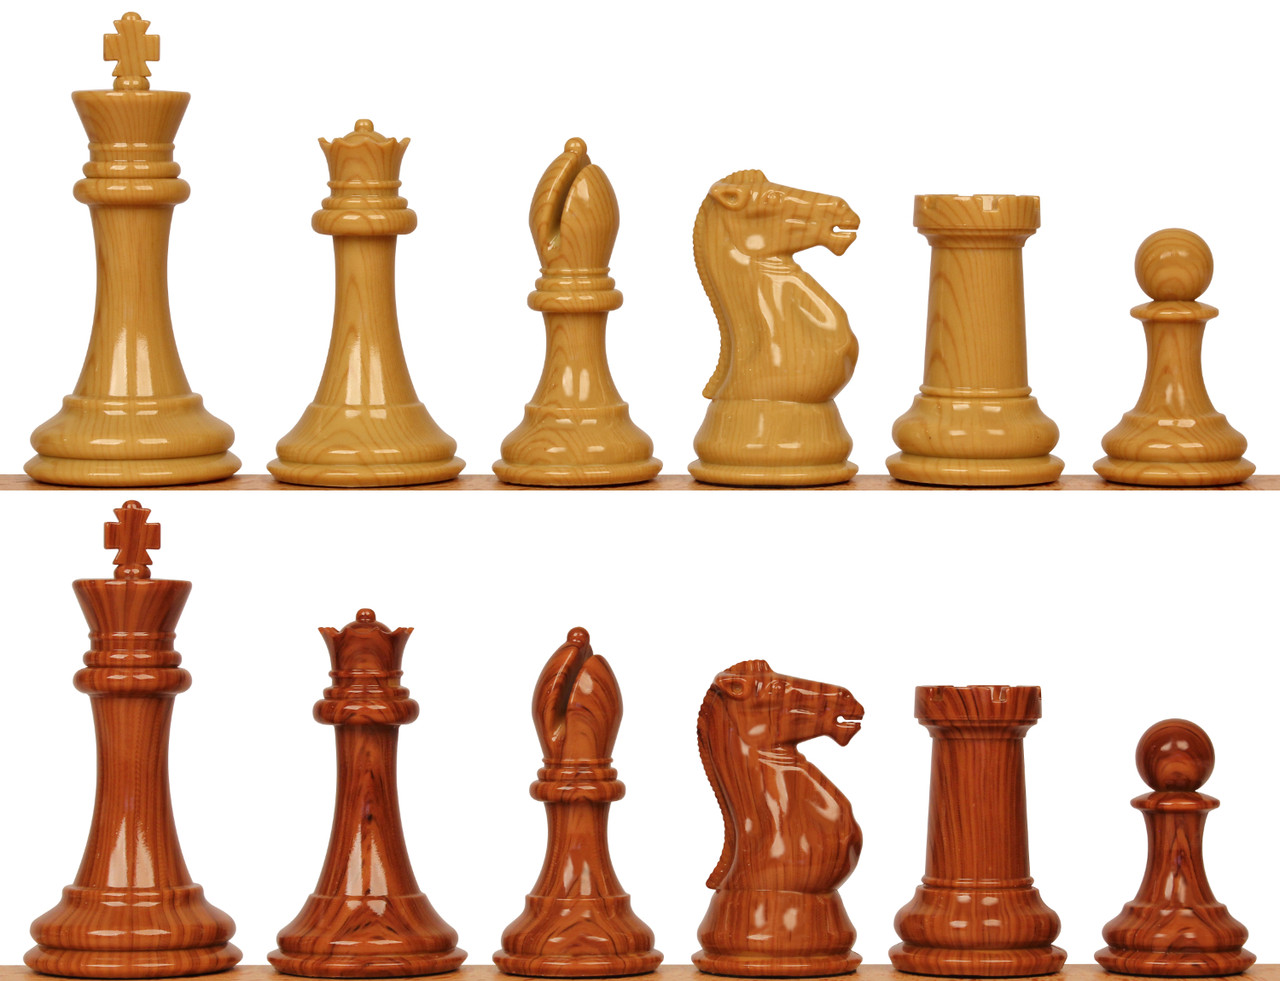 Ten Luxury Chess Sets Who Only Rich People Can Afford